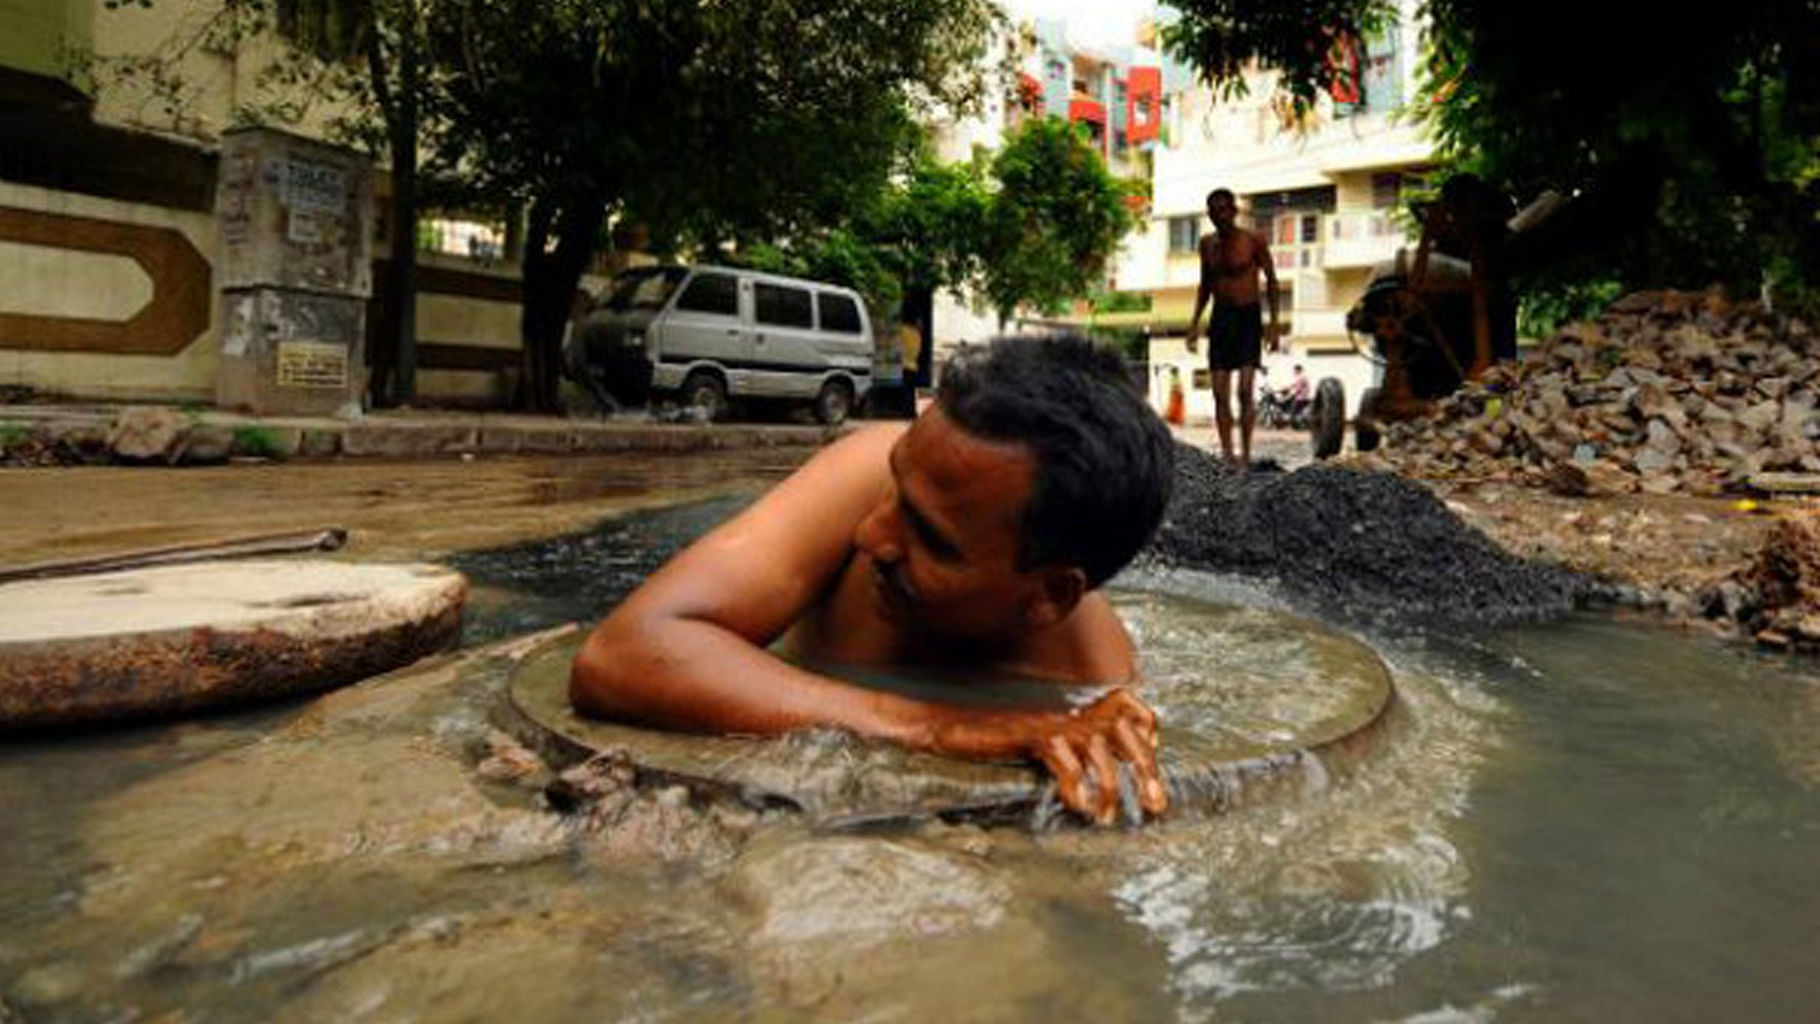 As many as 12,226 manual scavengers were identified across India – 82 percent of these are in Uttar Pradesh. (Photo Courtesy: <i>The News Minute</i>)